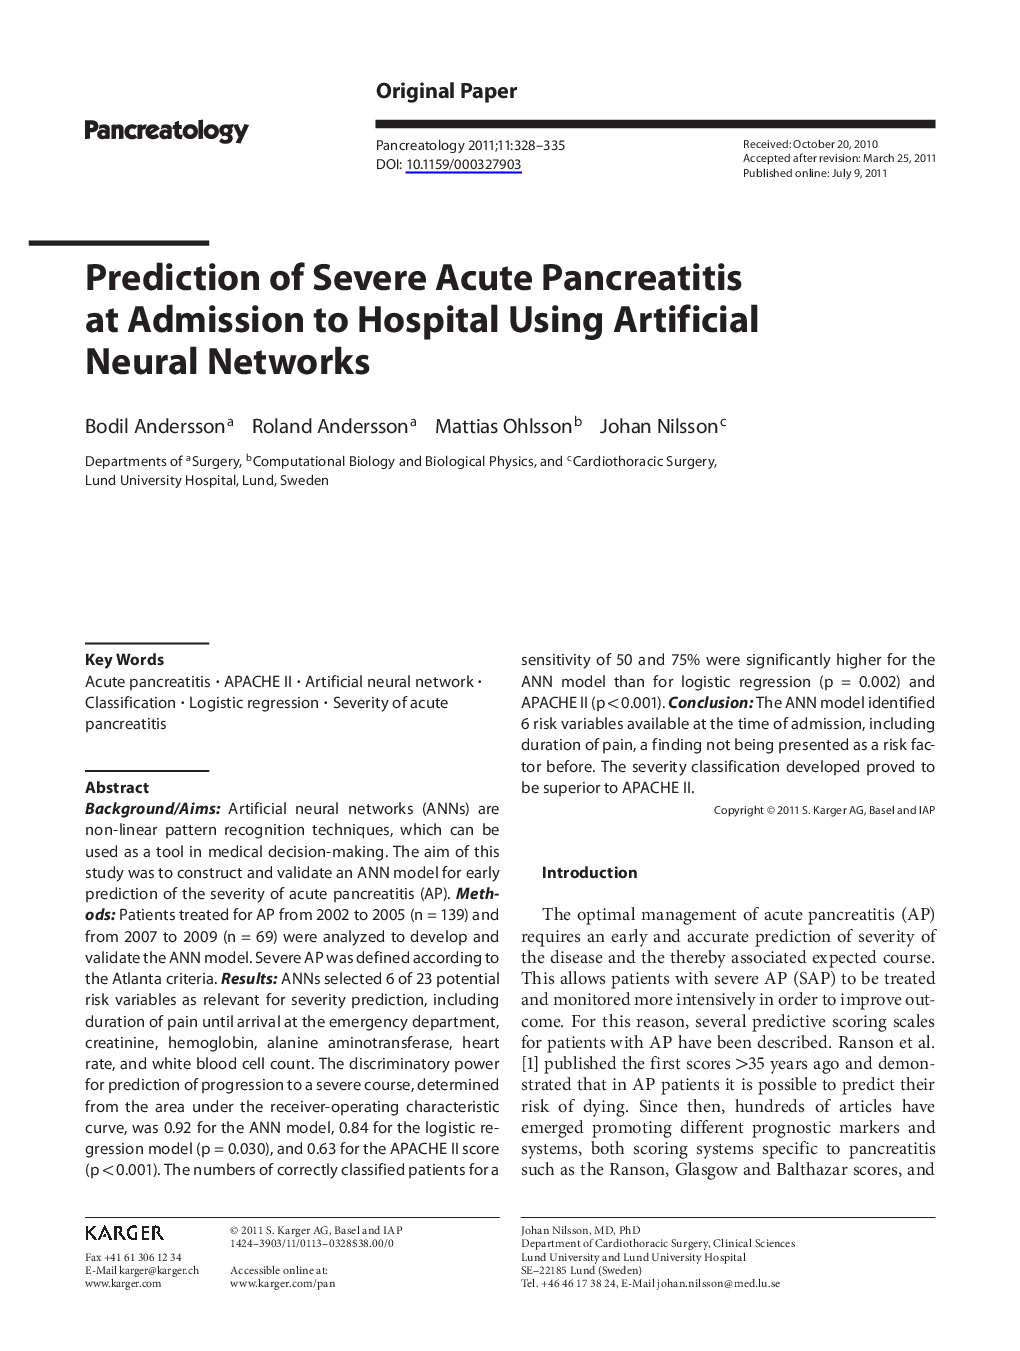 Prediction of Severe Acute Pancreatitis at Admission to Hospital Using Artificial Neural Networks